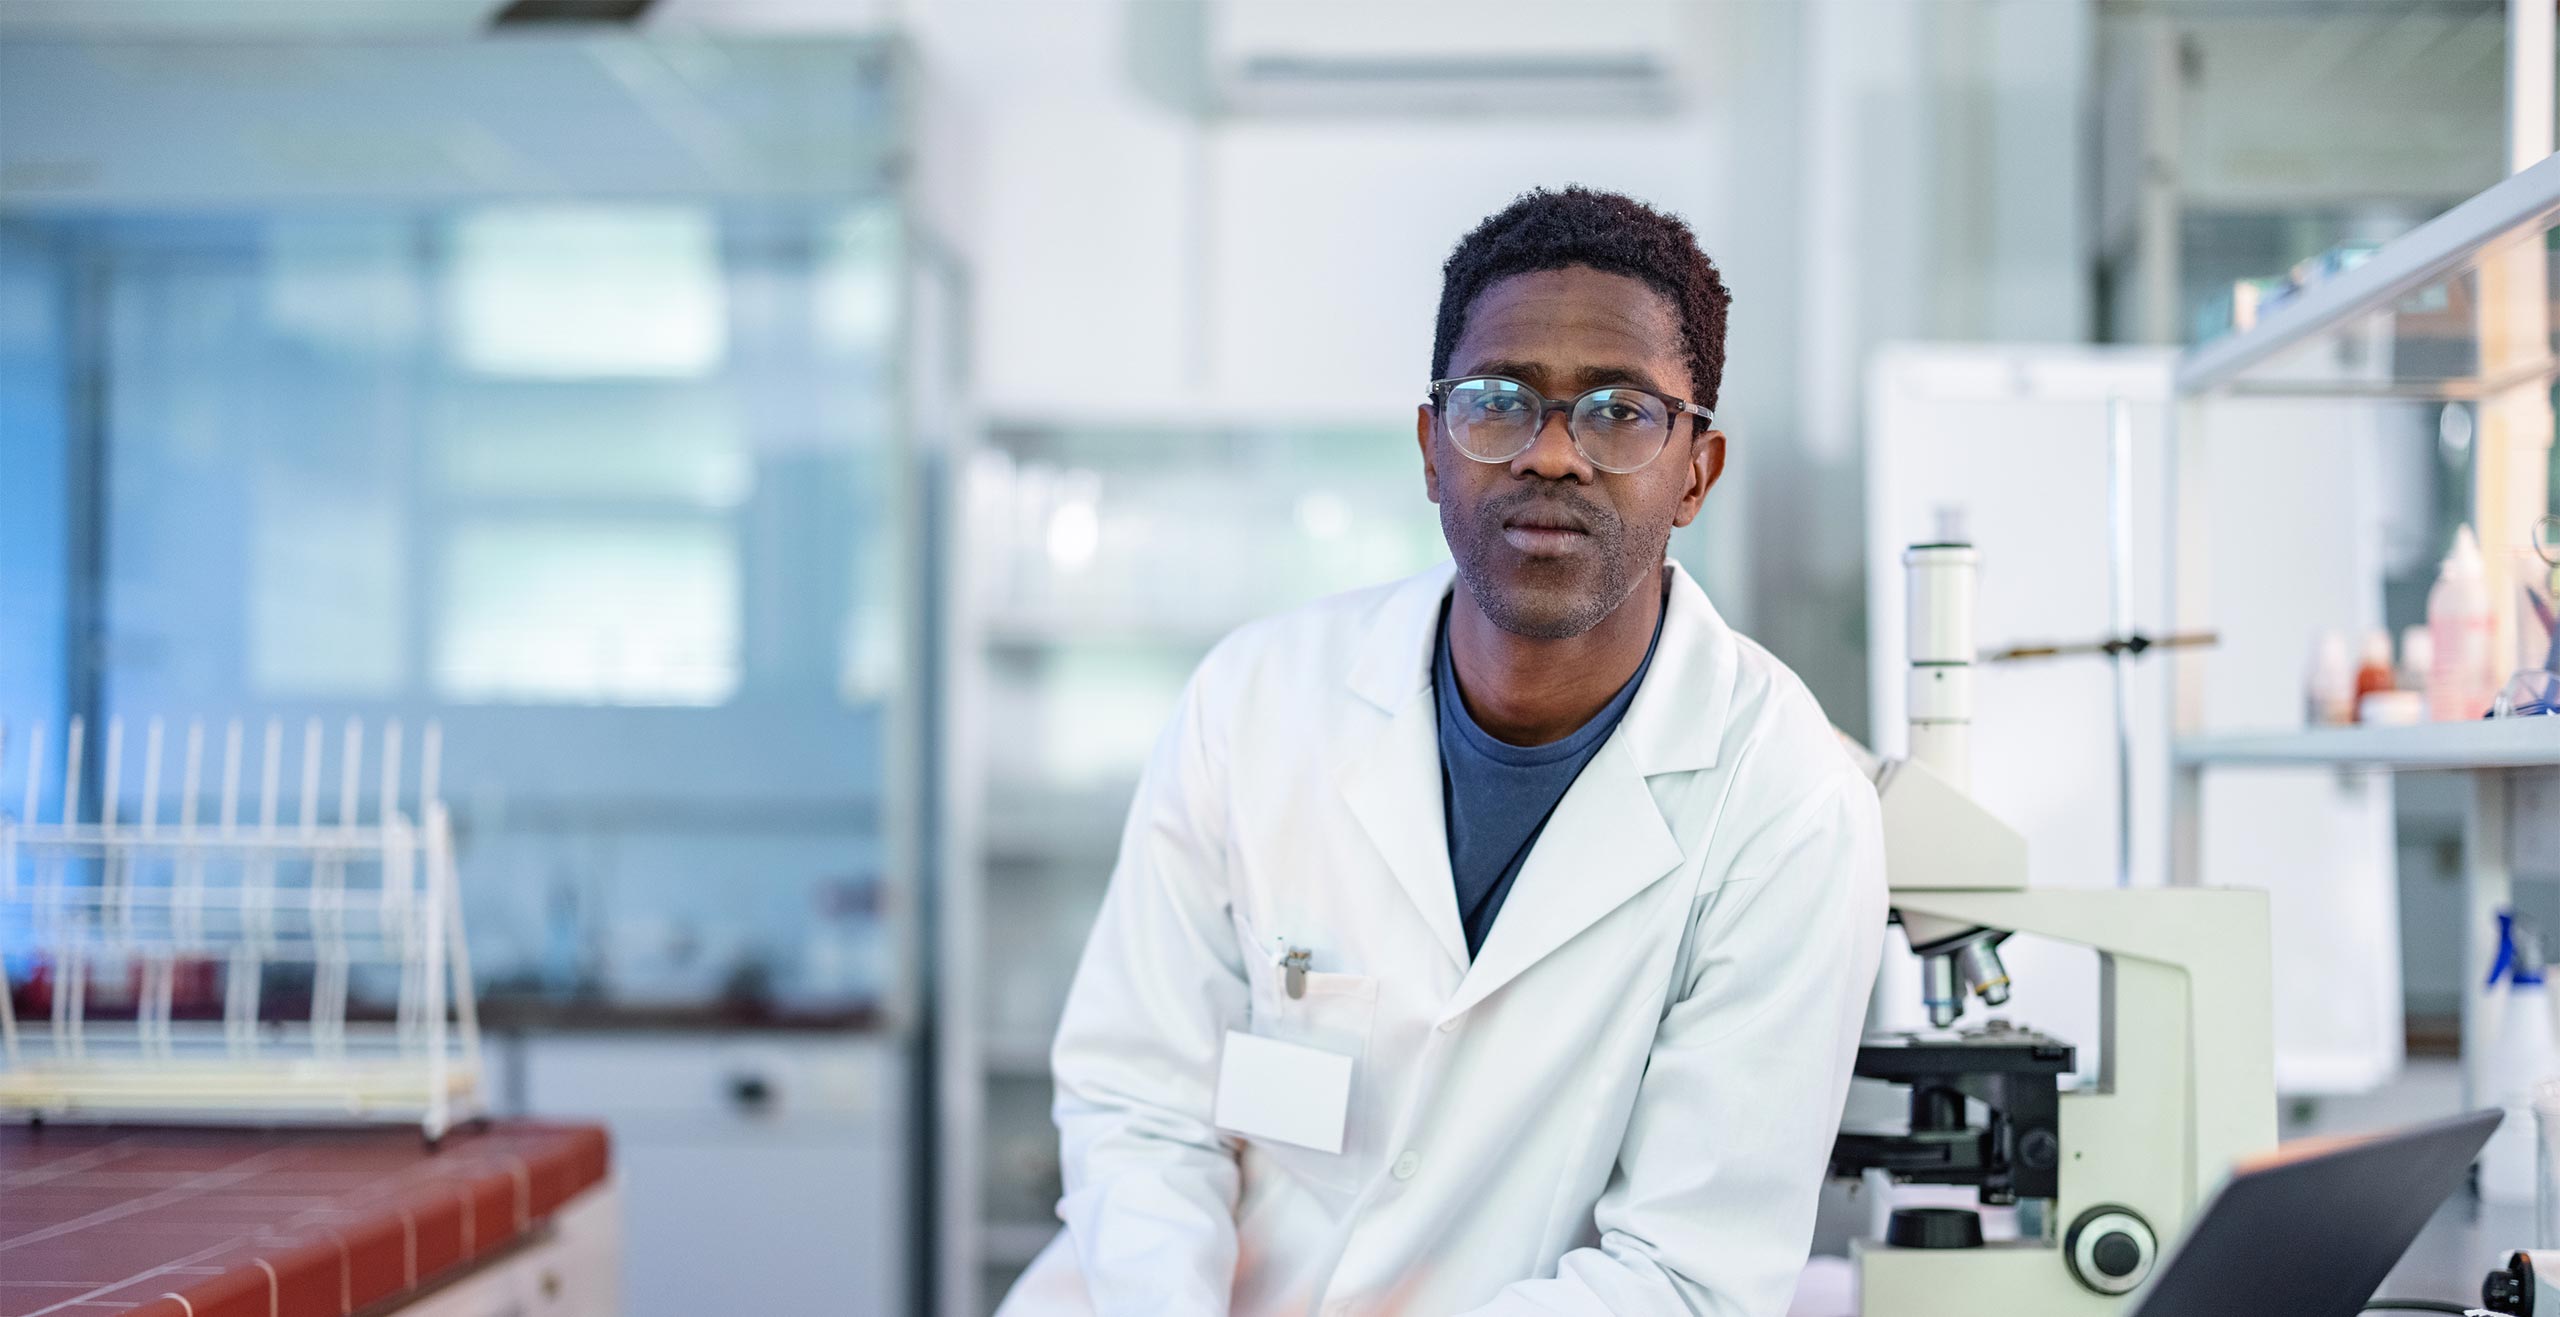 Medical researcher in a white lab coat, leaning against a laboratory counter.